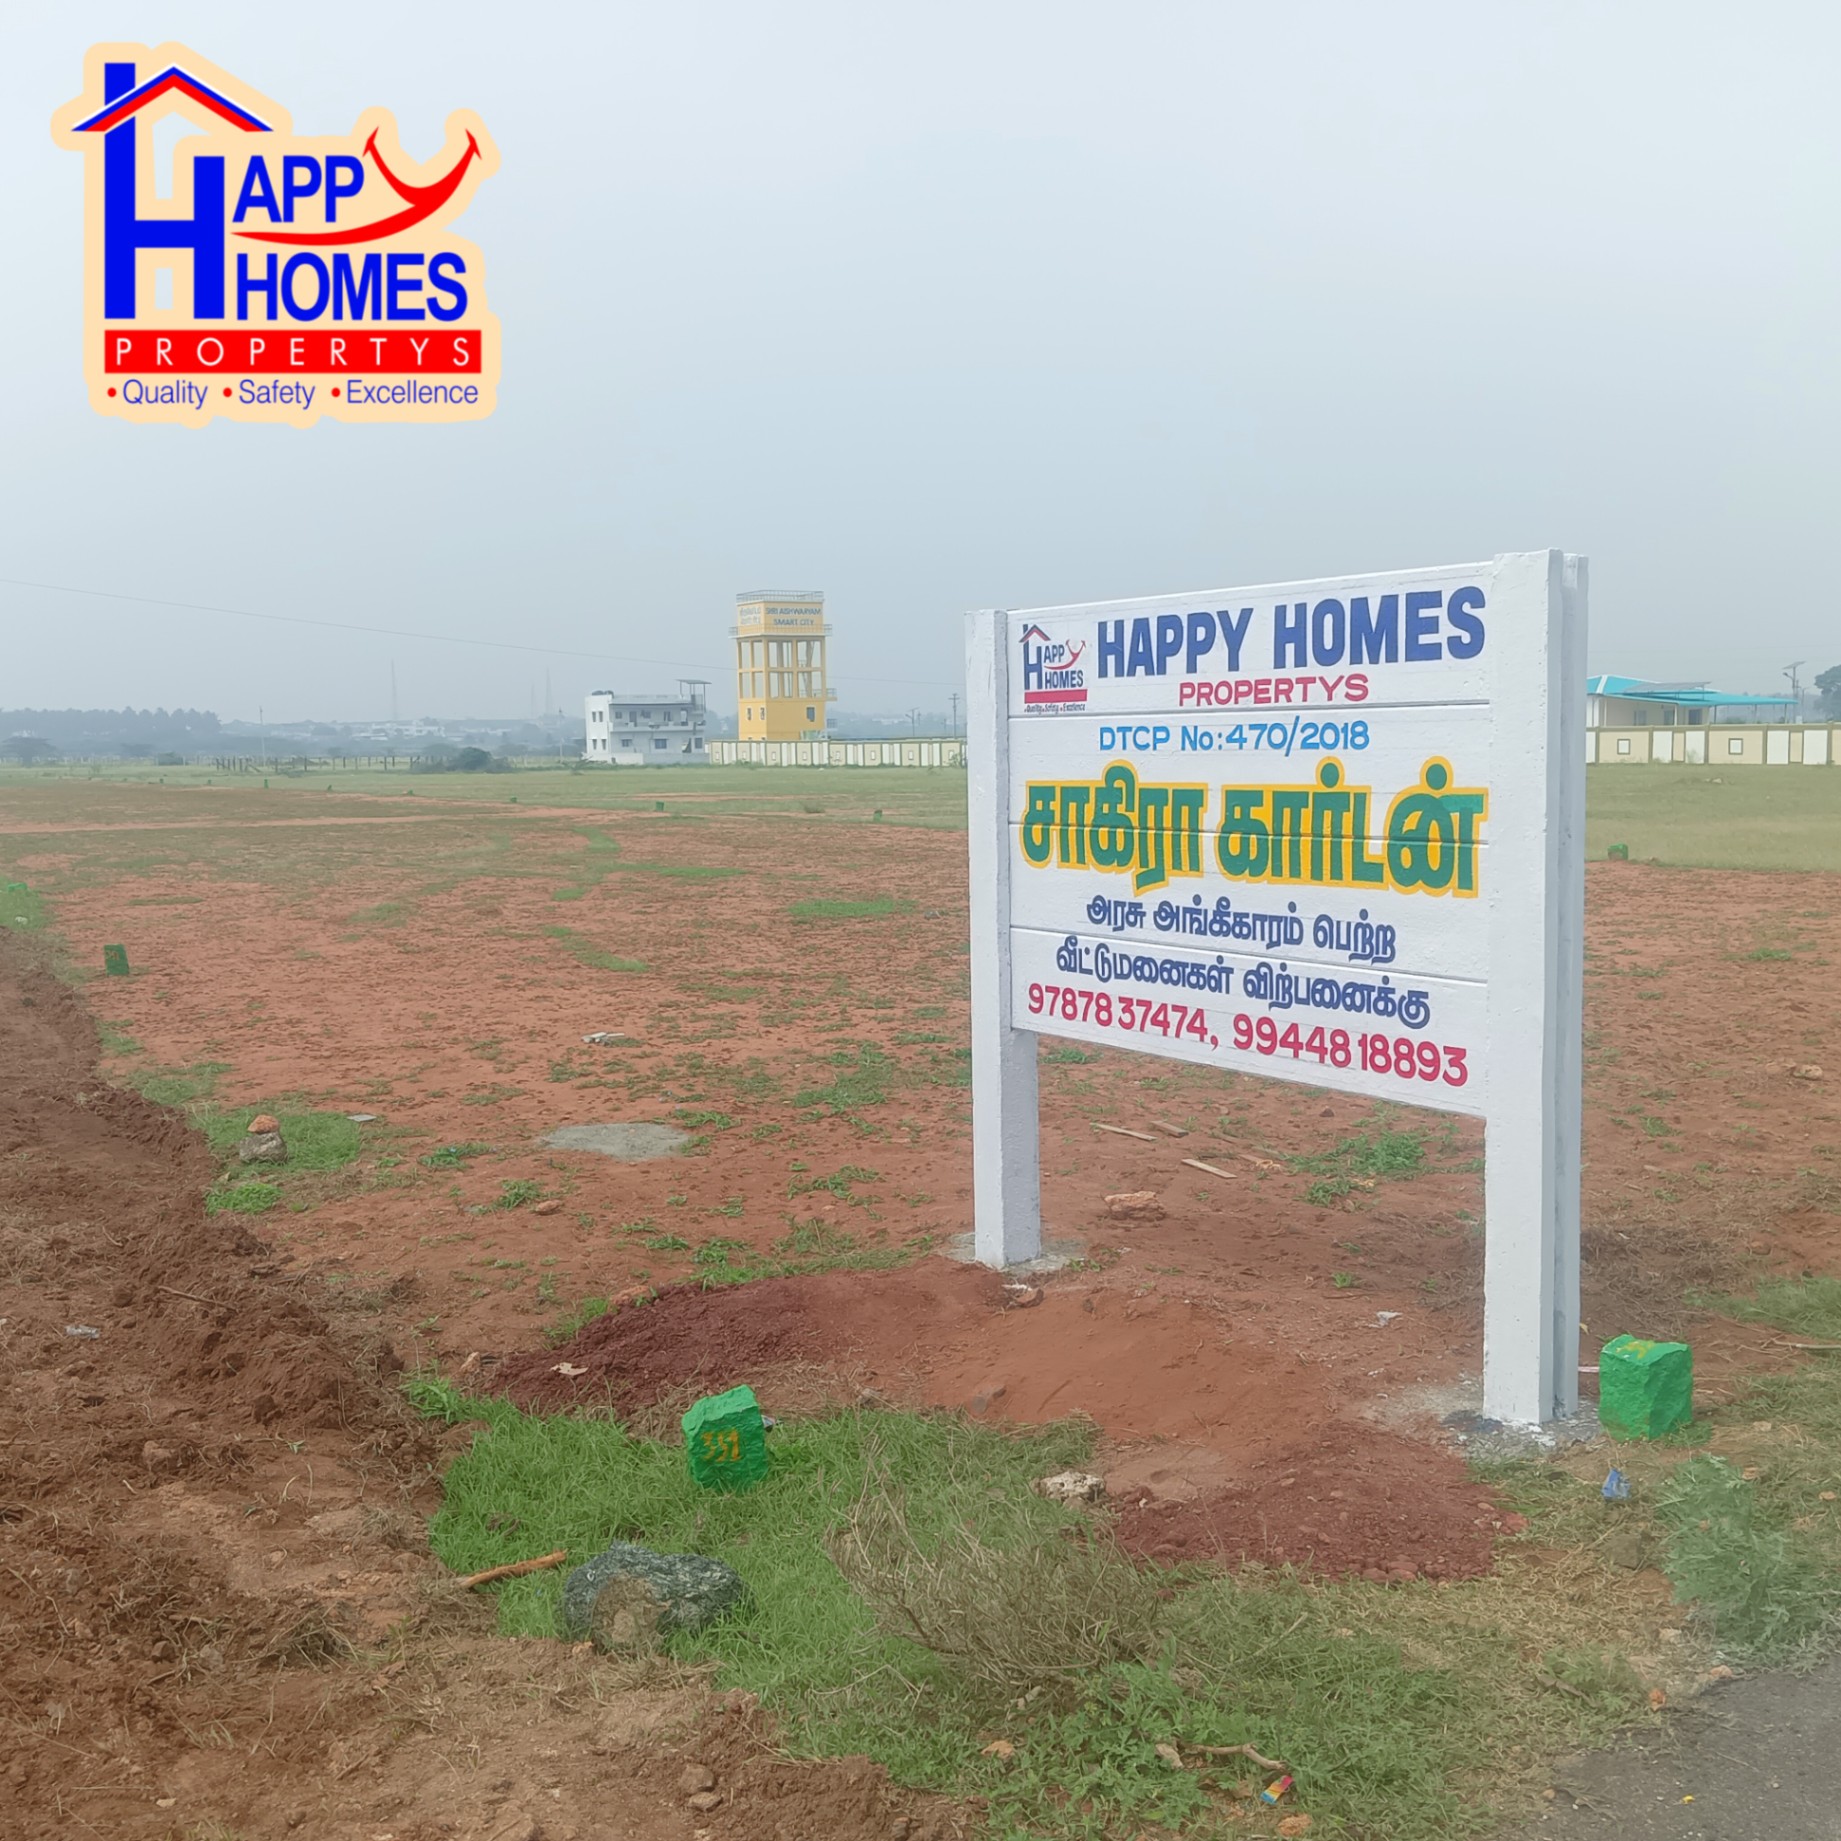 1,750 sq. ft. Sell Land/ Plot for sale @Chettipalayam 